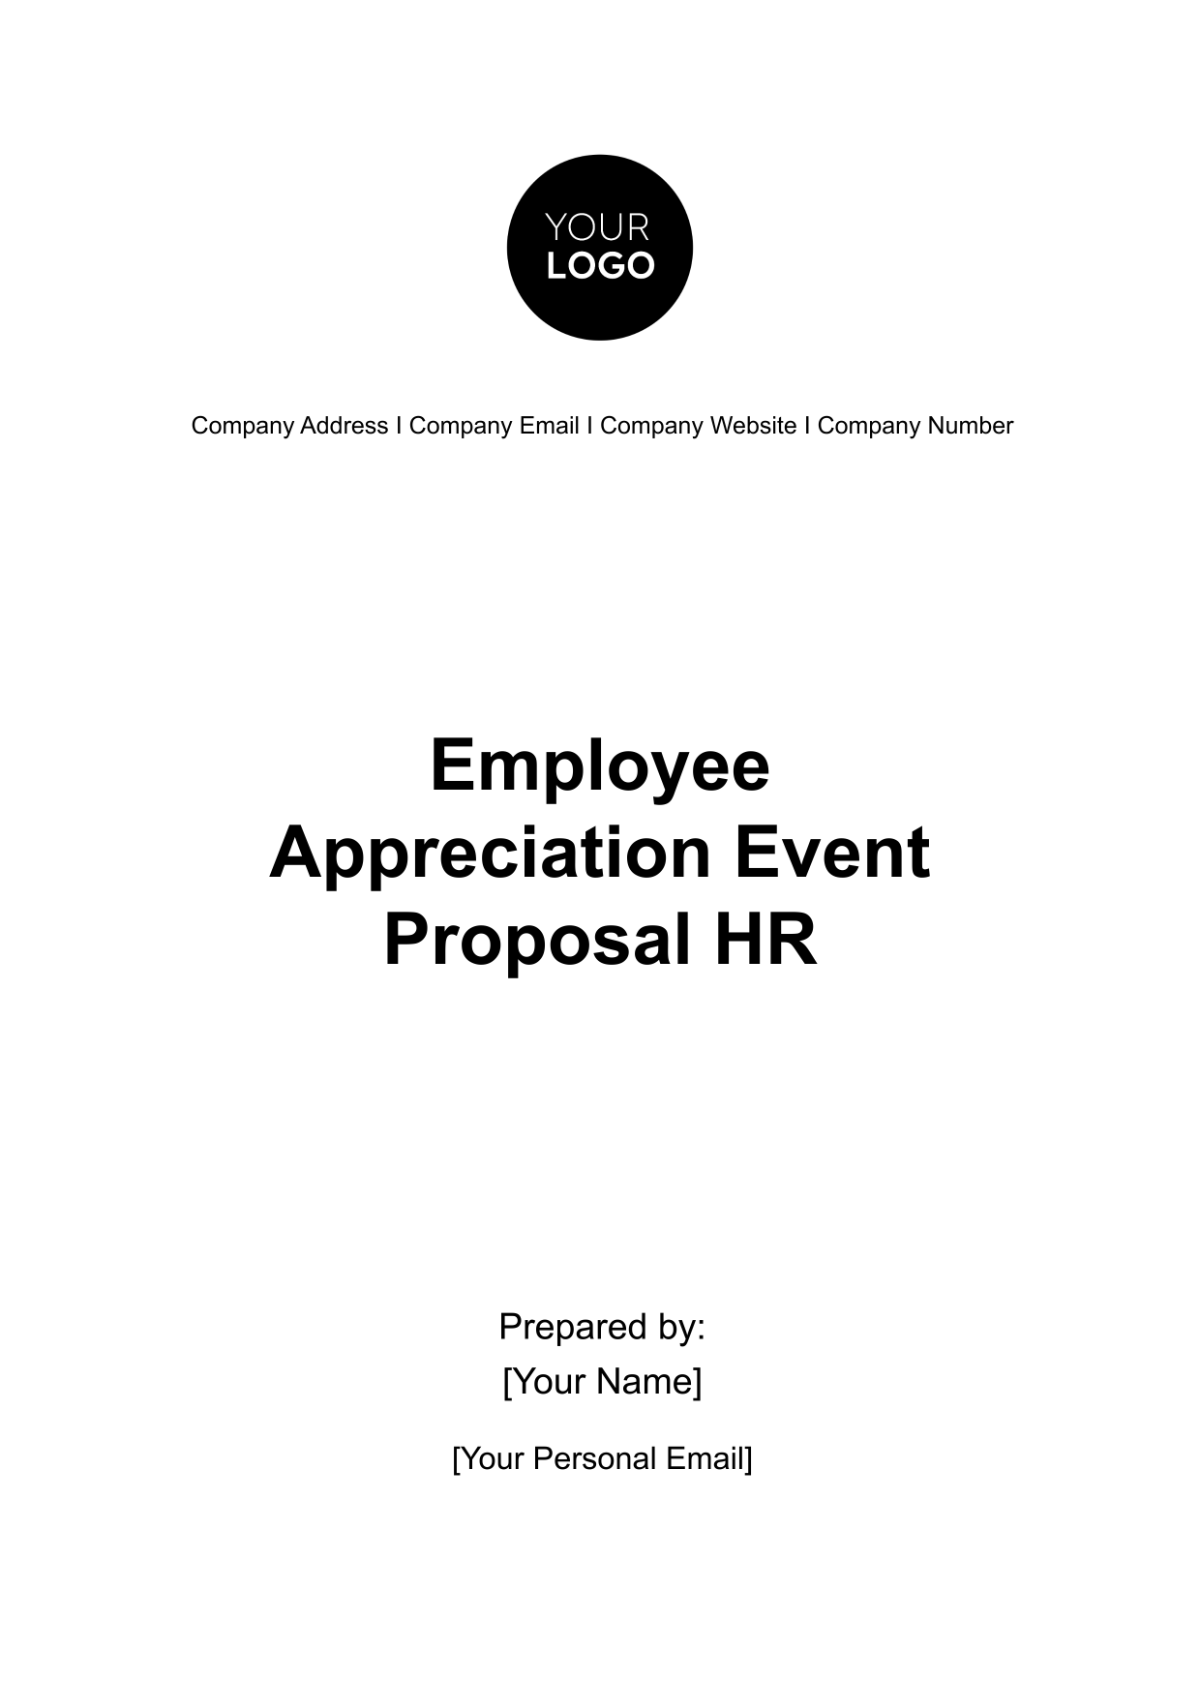 Free Employee Appreciation Event Proposal HR Template